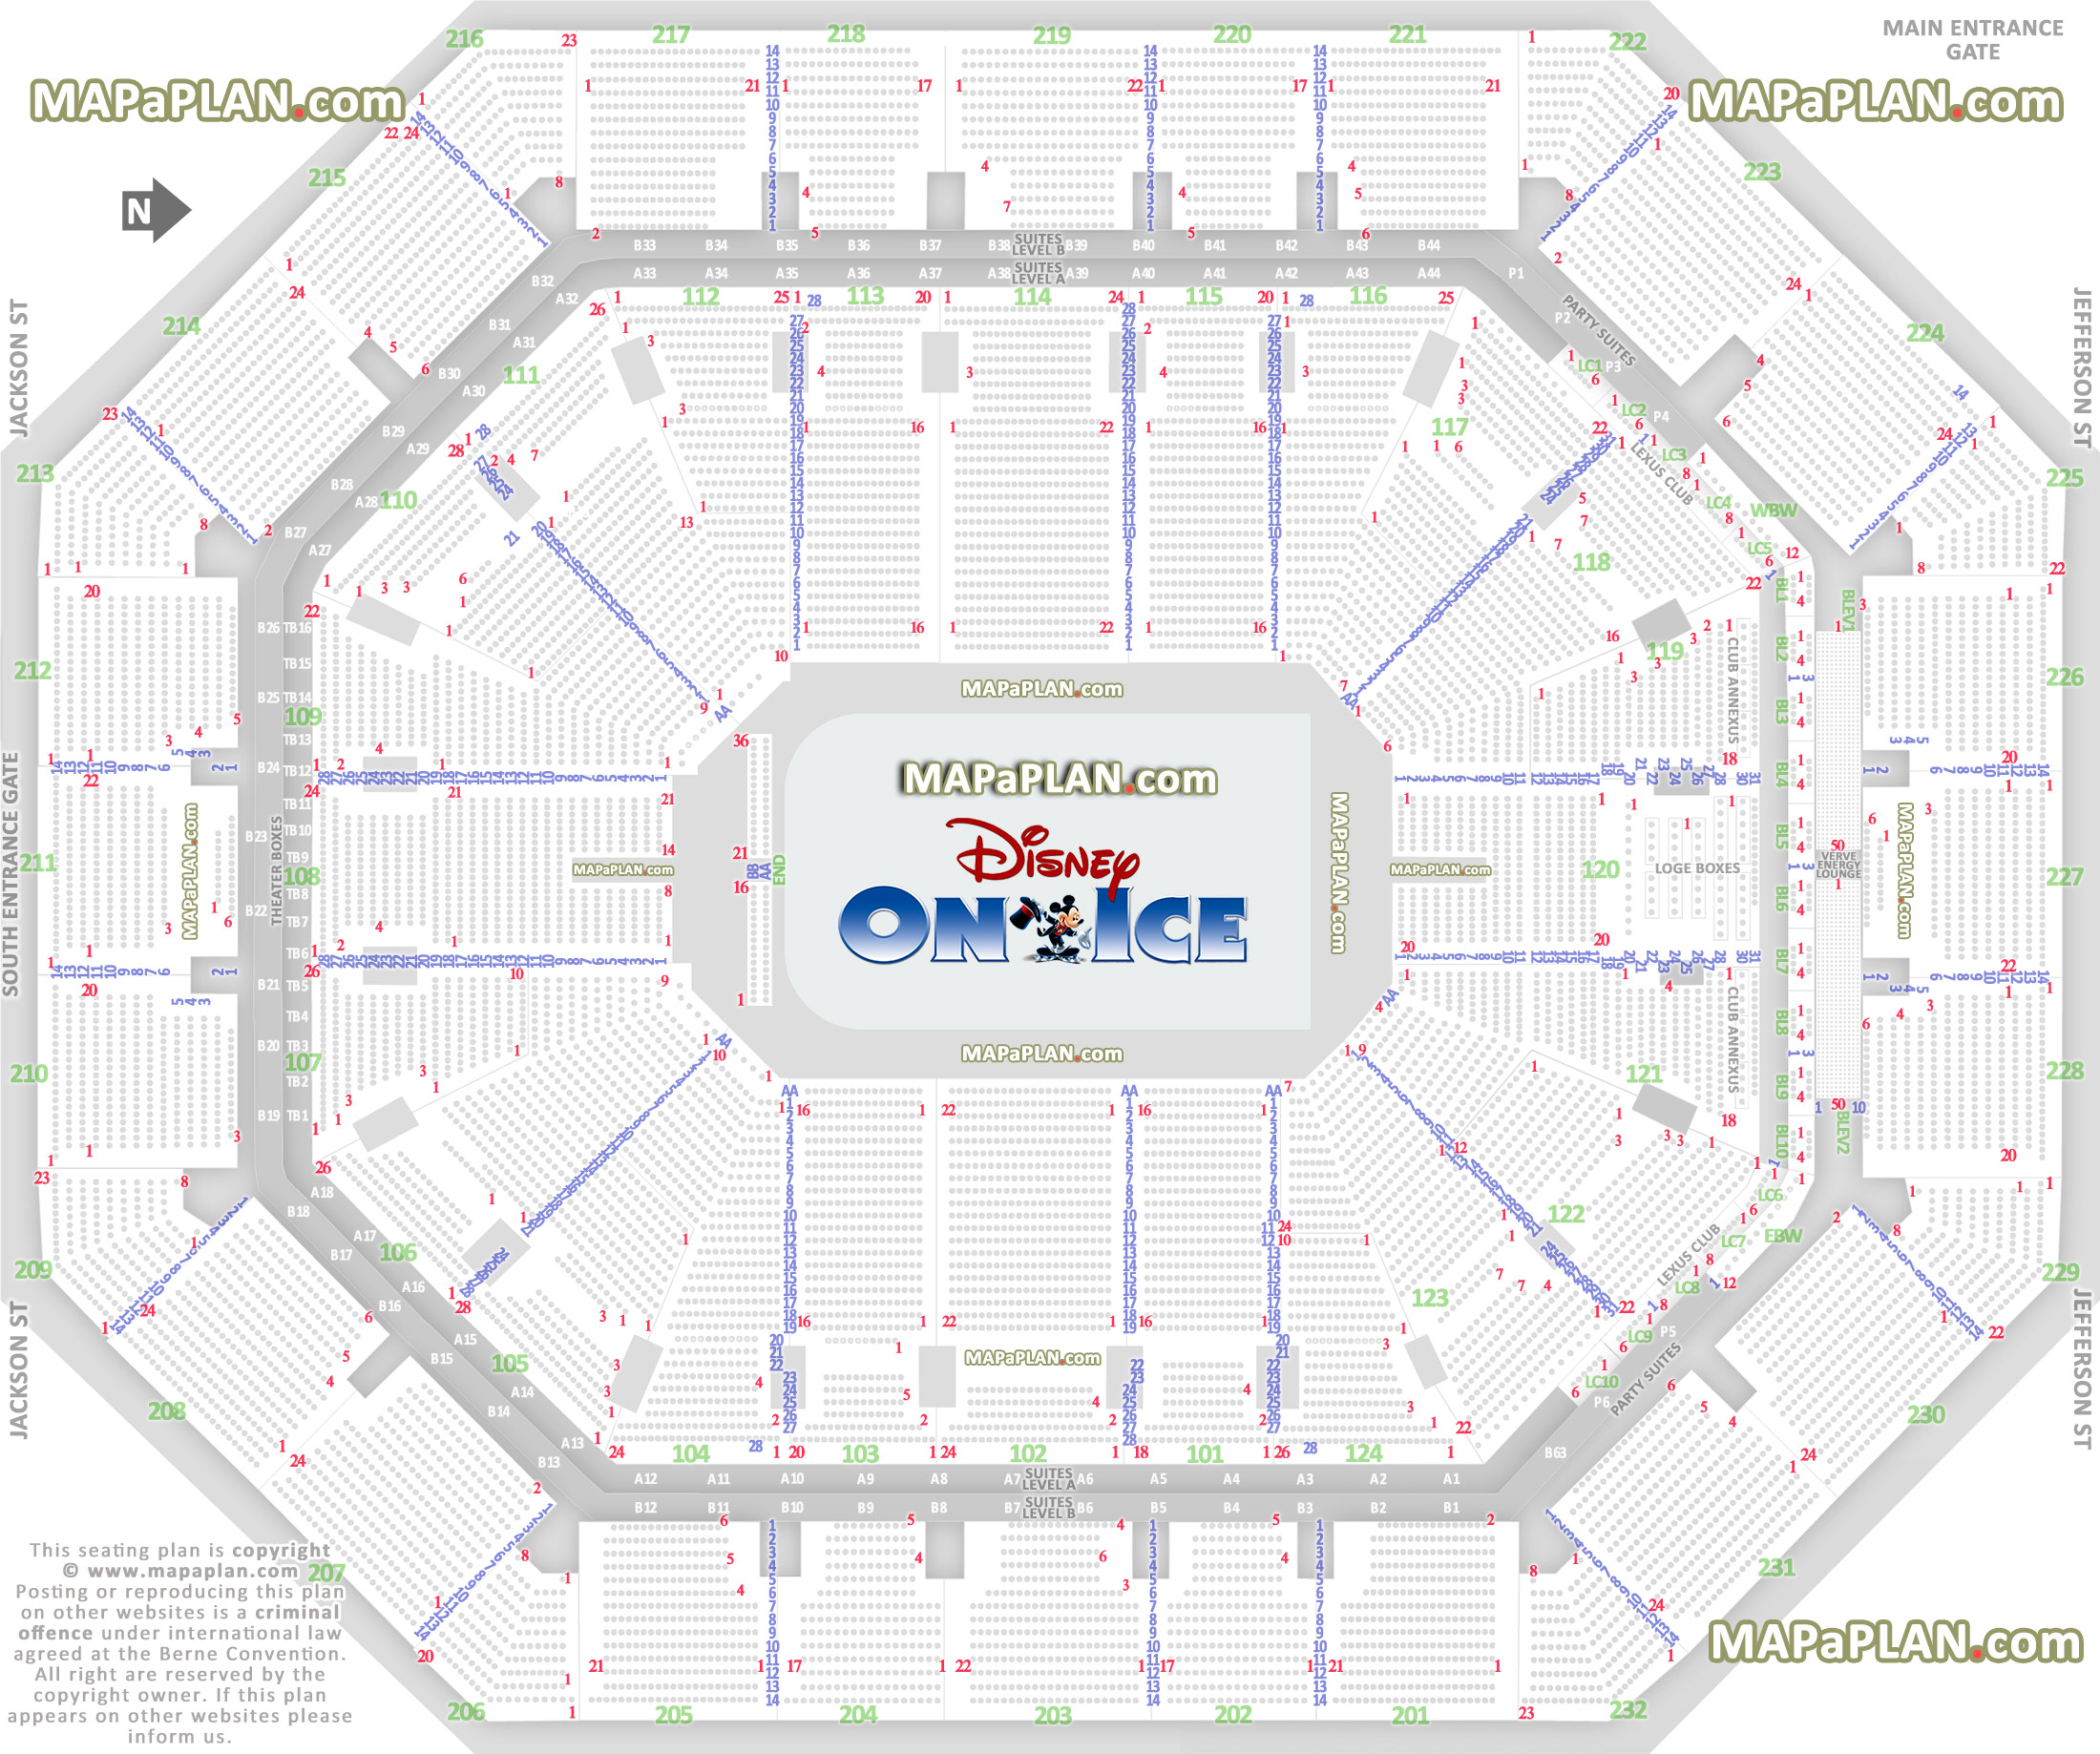 disney ice live printable virtual information guide full exact row letters numbers plan aa bb 1 2 3 4 5 6 7 8 9 10 11 12 13 14 15 16 17 18 19 20 21 22 23 24 25 26 27 28 29 30 Phoenix Talking Stick Resort Arena seating chart